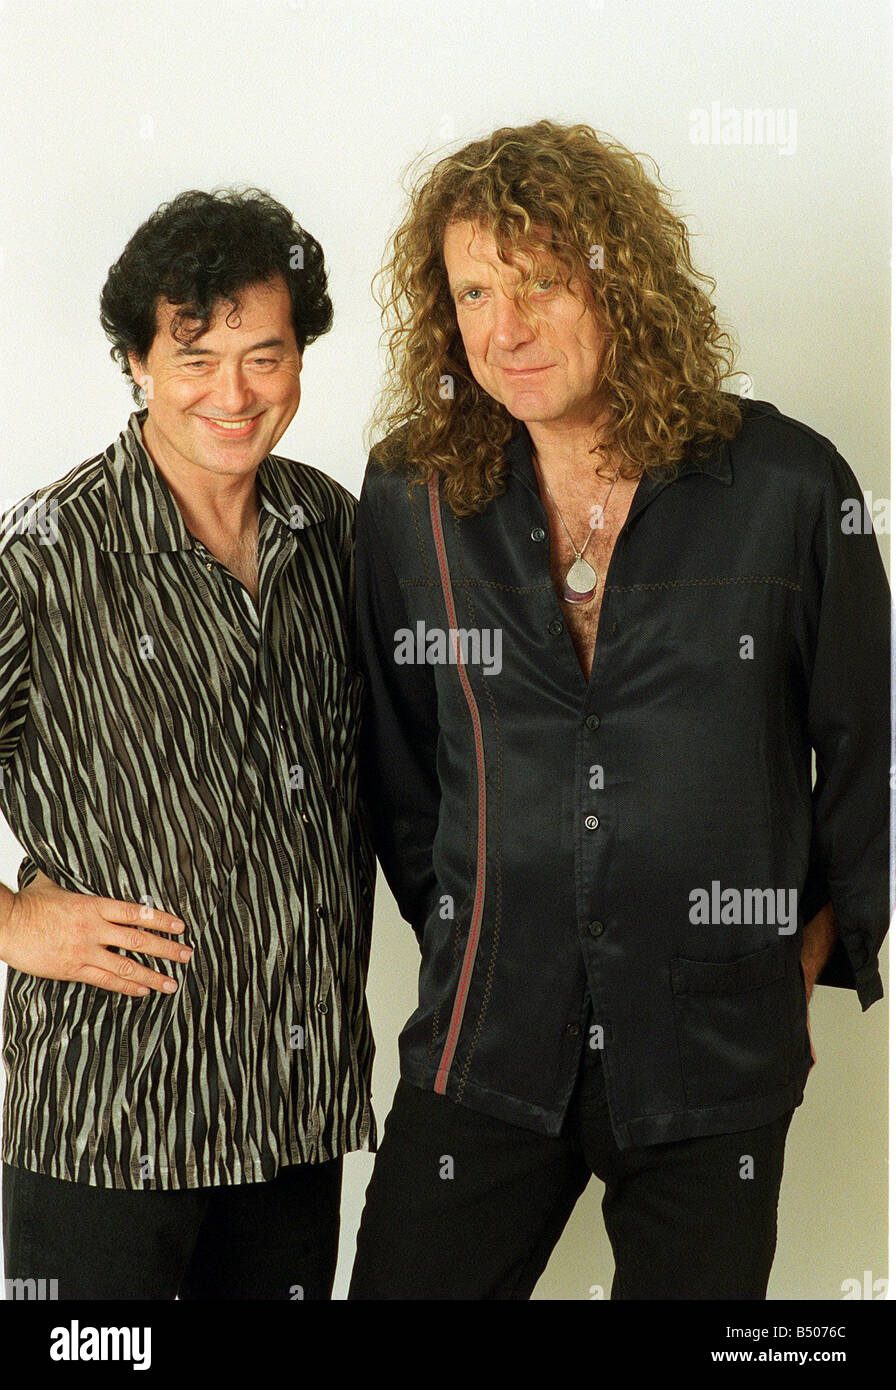 Jimmy Page former lead guitarist and Robert Plant former lead singer  members of the Led Zeppelin Band Stock Photo - Alamy